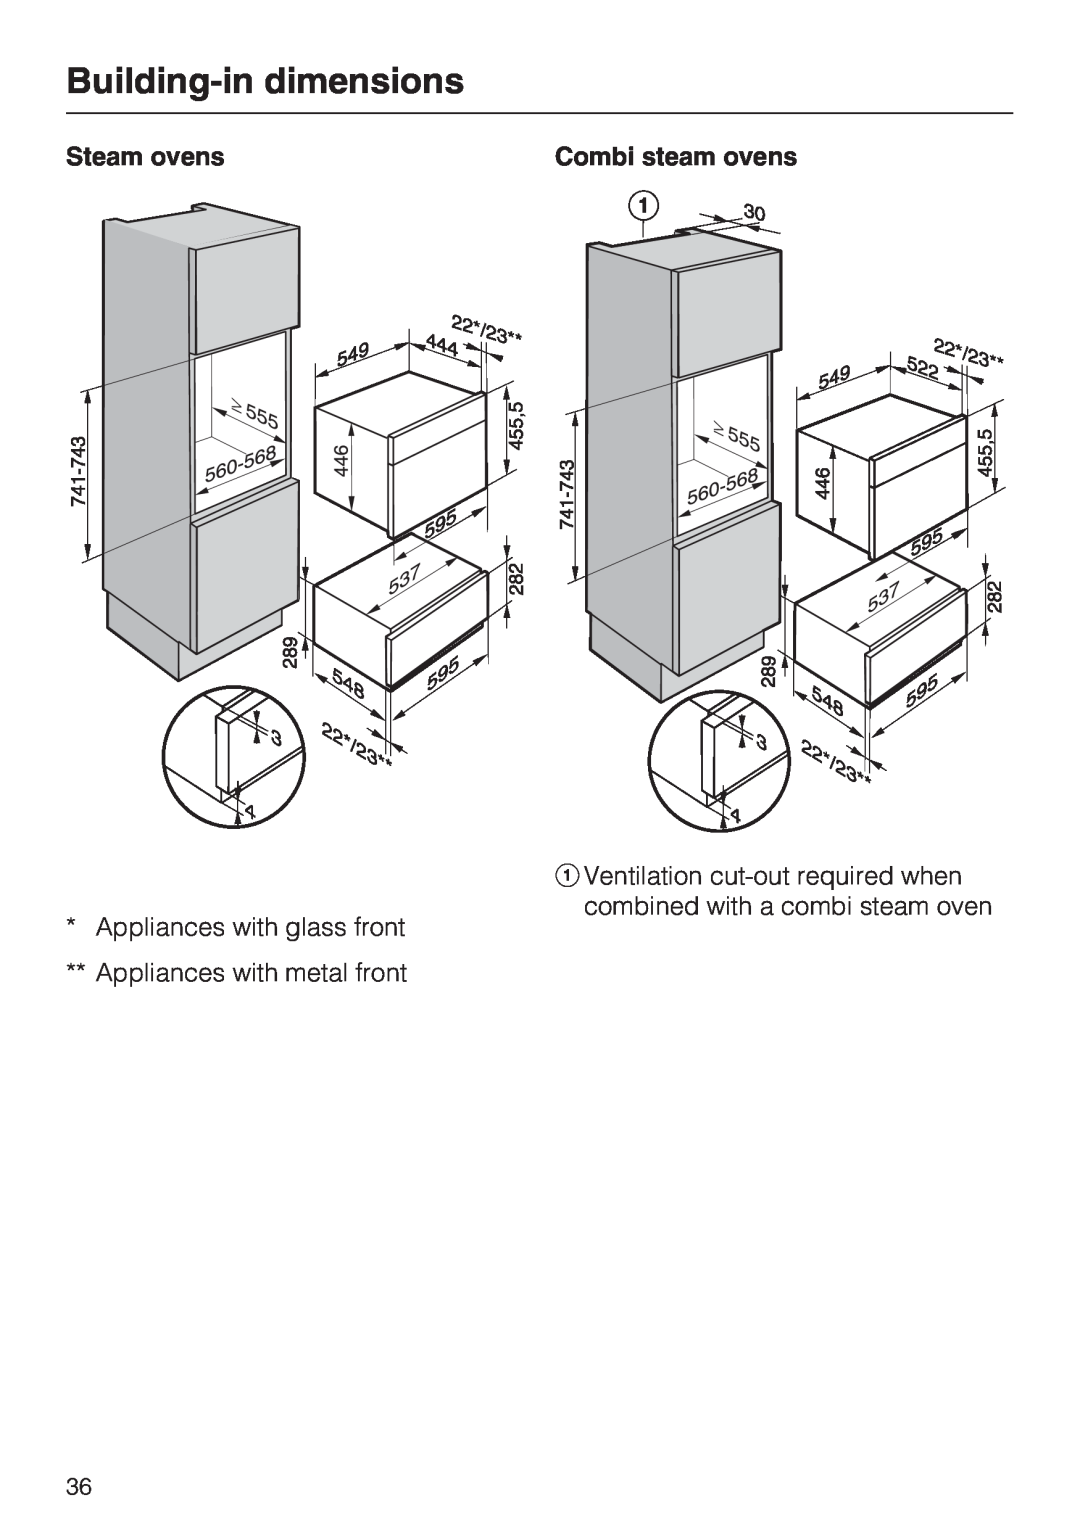 Miele ESW 50X0-14, ESW 5088-14, ESW 50X0-29 installation instructions Building-in dimensions, Steam ovens, Combi steam ovens 